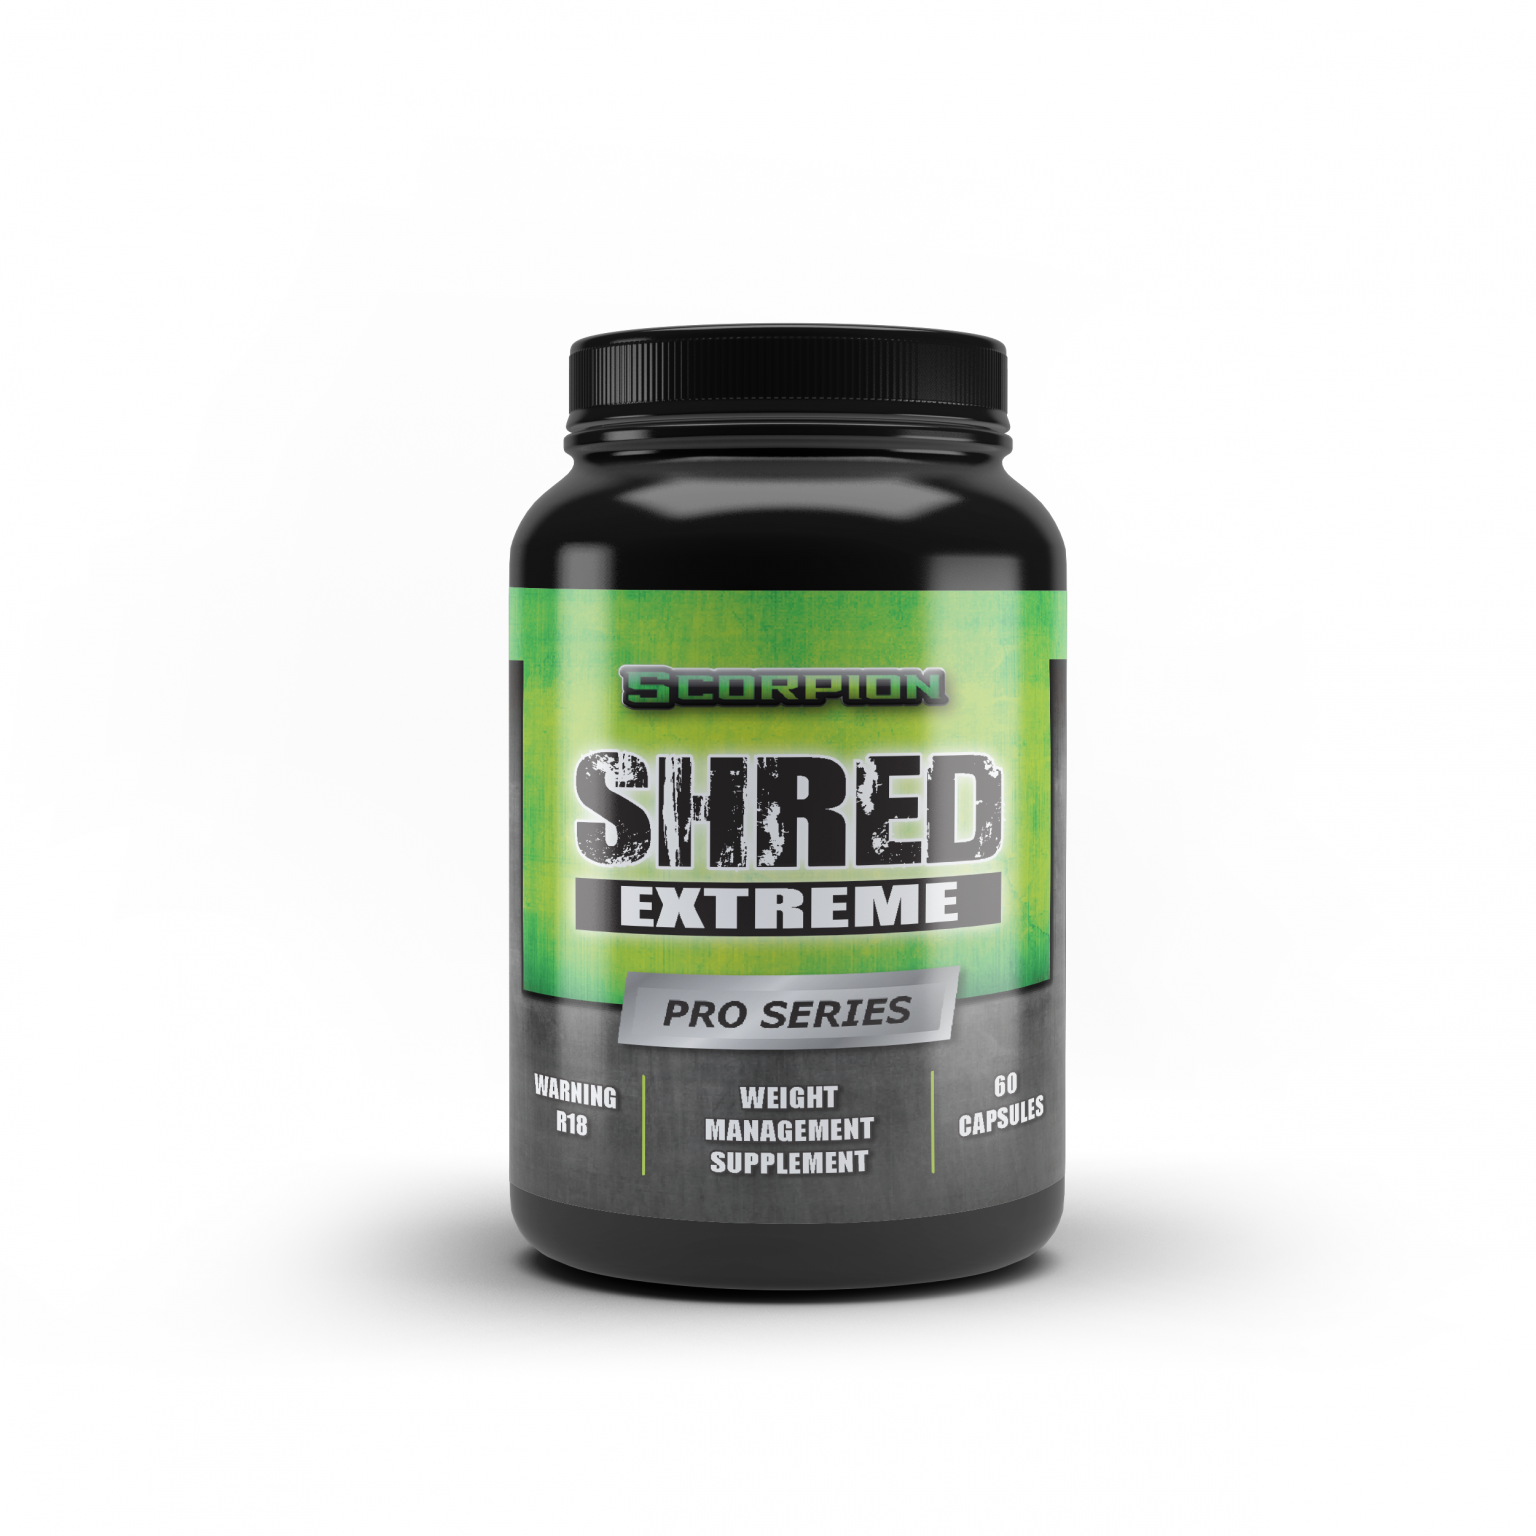 SCORPION SHRED EXTREME CAPSULES - | Scorpion Supplements | Supplement ...